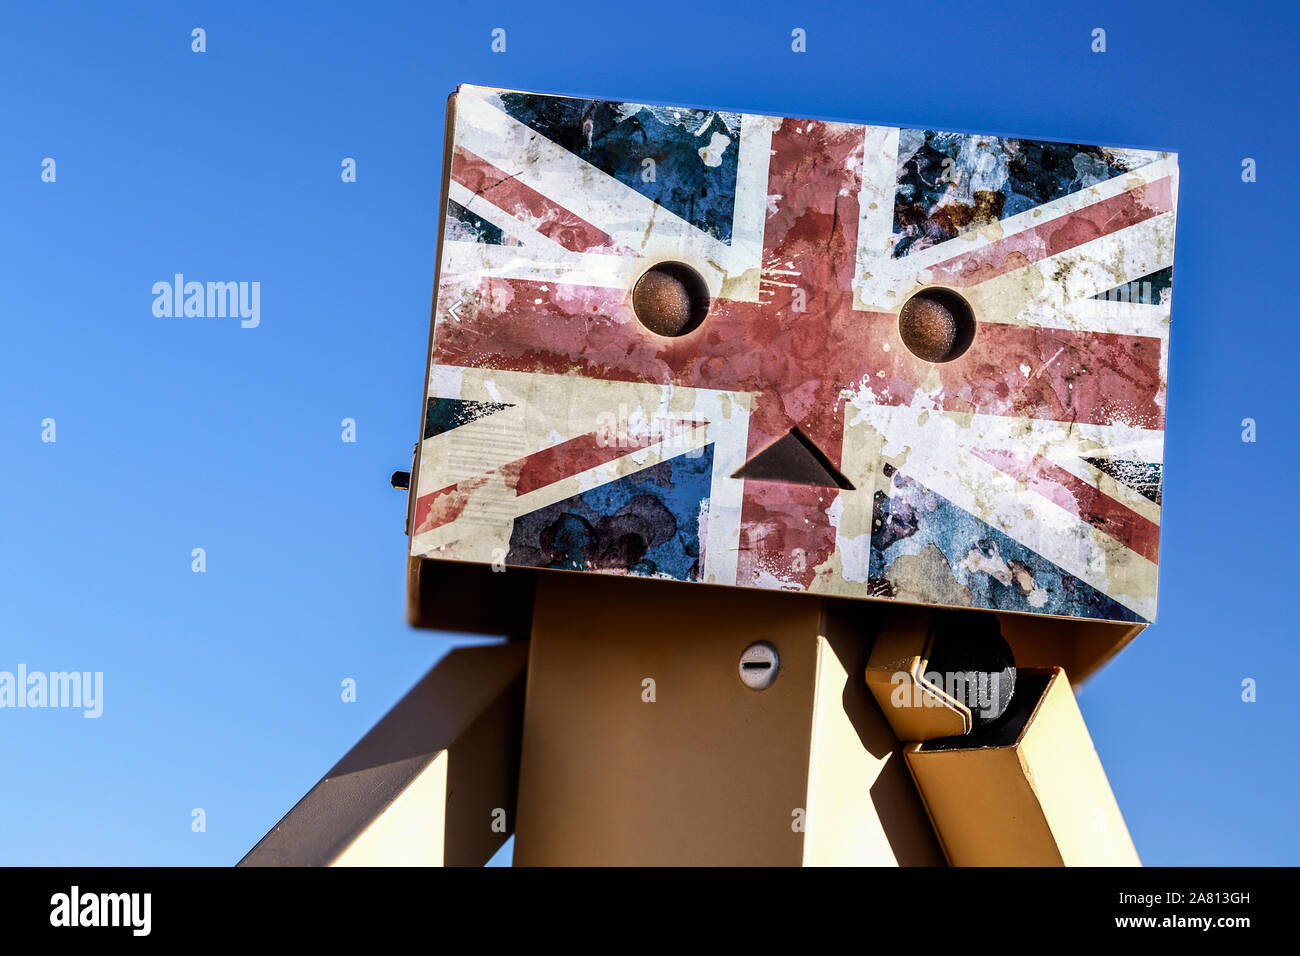 A Danbo Danboard toy robot cardboard box character with a worn union jack emblem across its cardboard face. Stock Photo